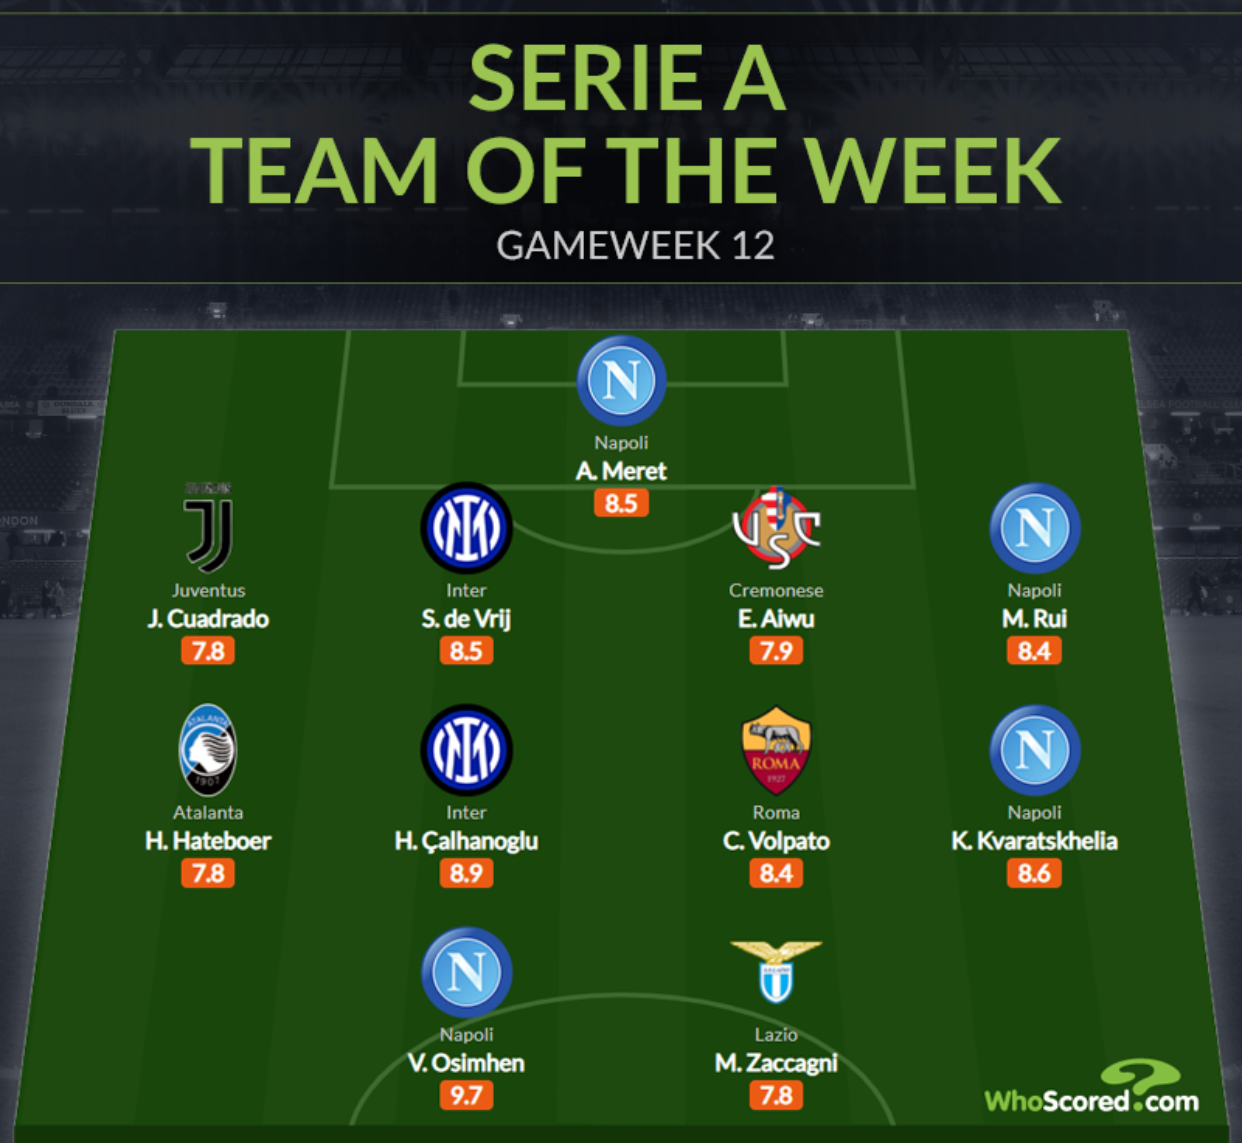 Osimhen Makes Serie A Team Of The Week